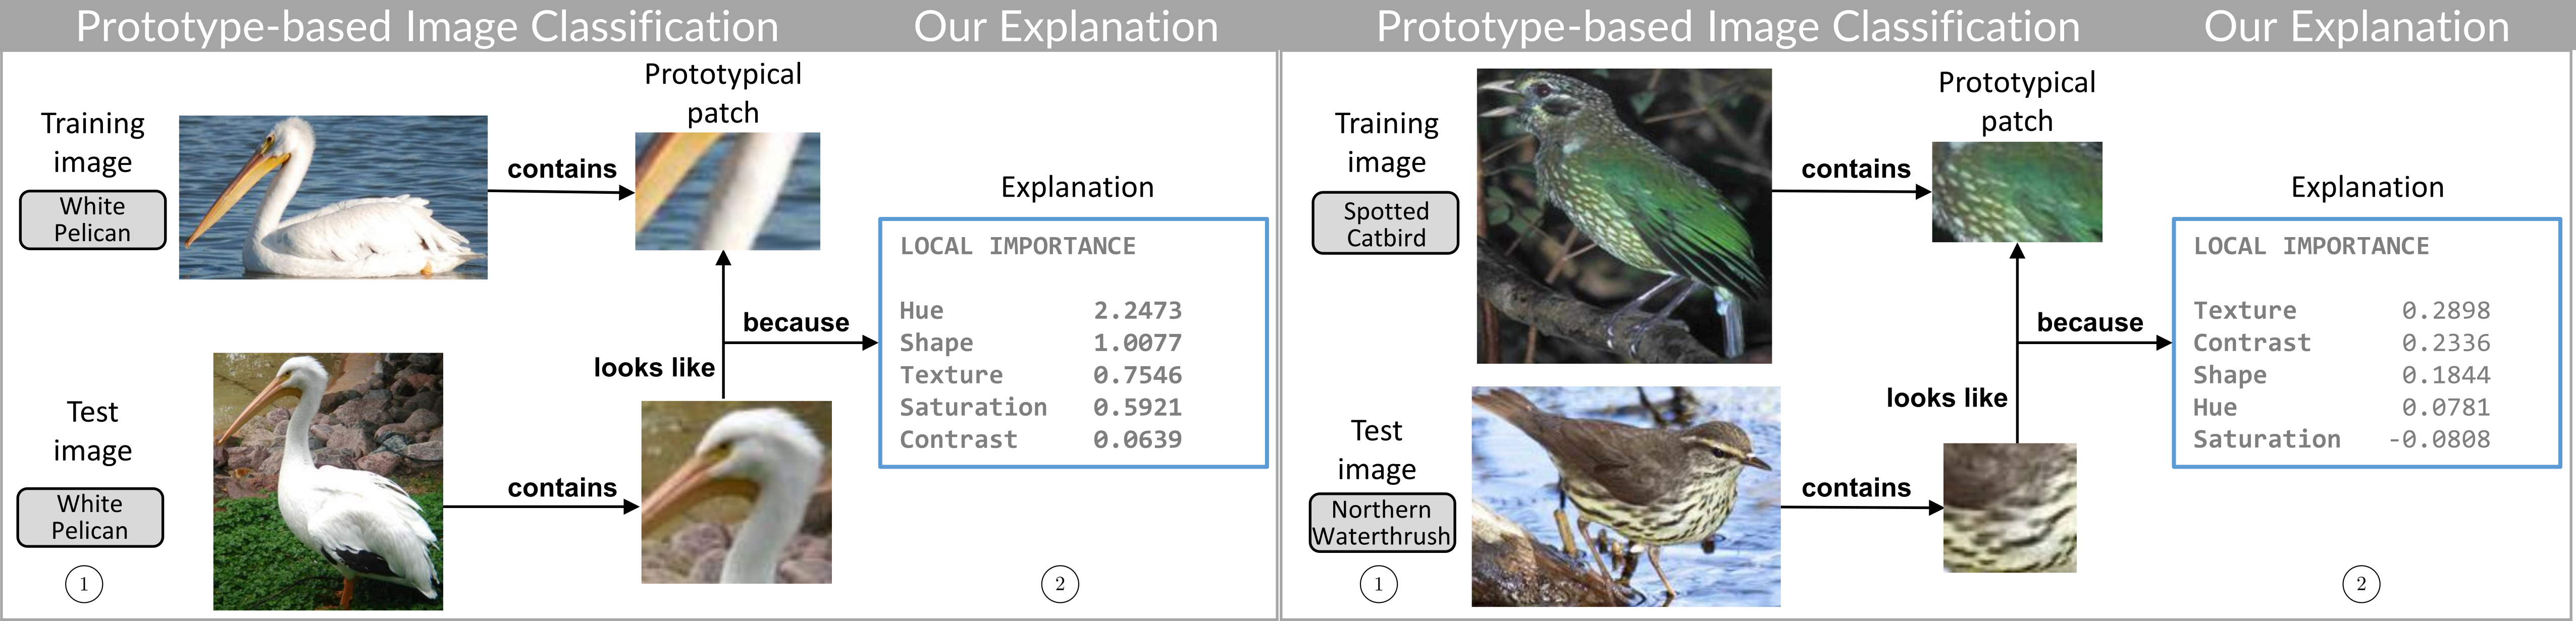 Overview of explaining prototypical learning for image recognition.